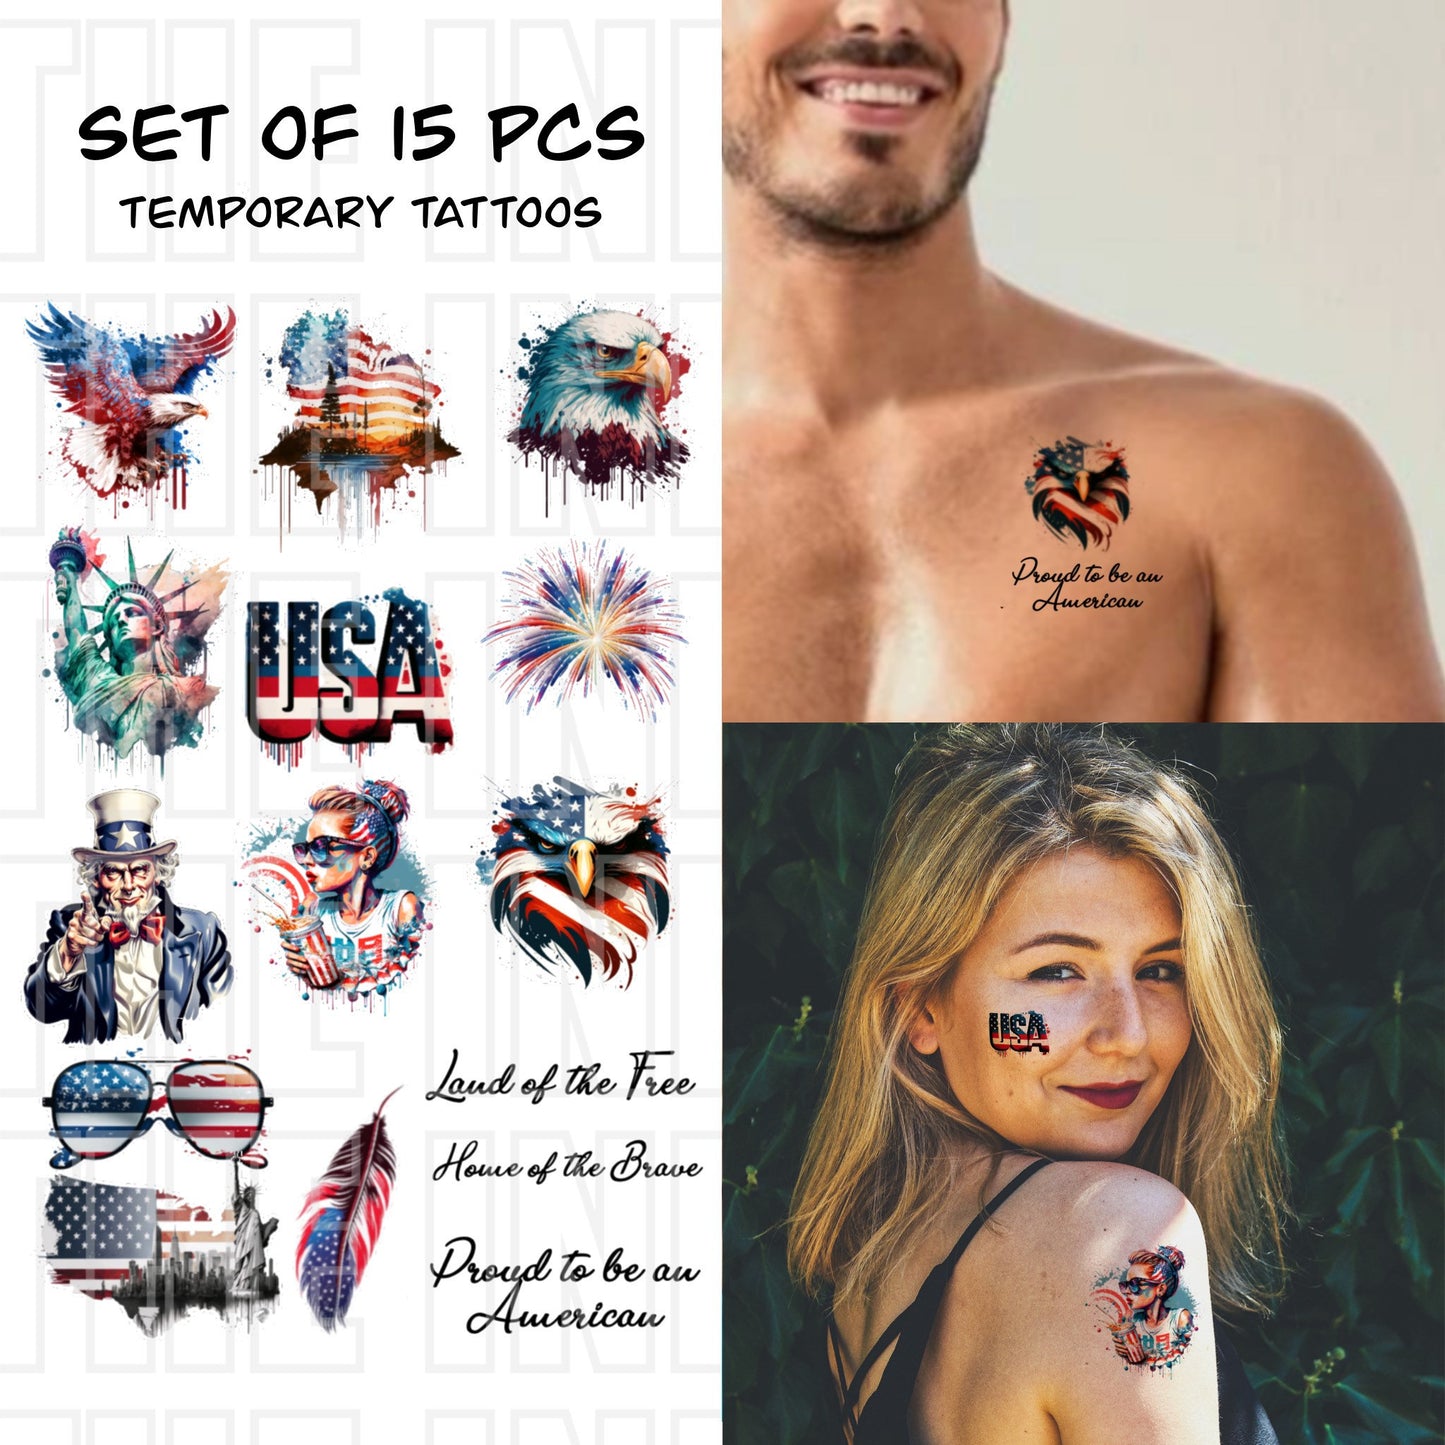 US Independence Day Tattoos - 4th of July - American Flag and Eagle - USA - Temporary Tattoos - Party Ideas